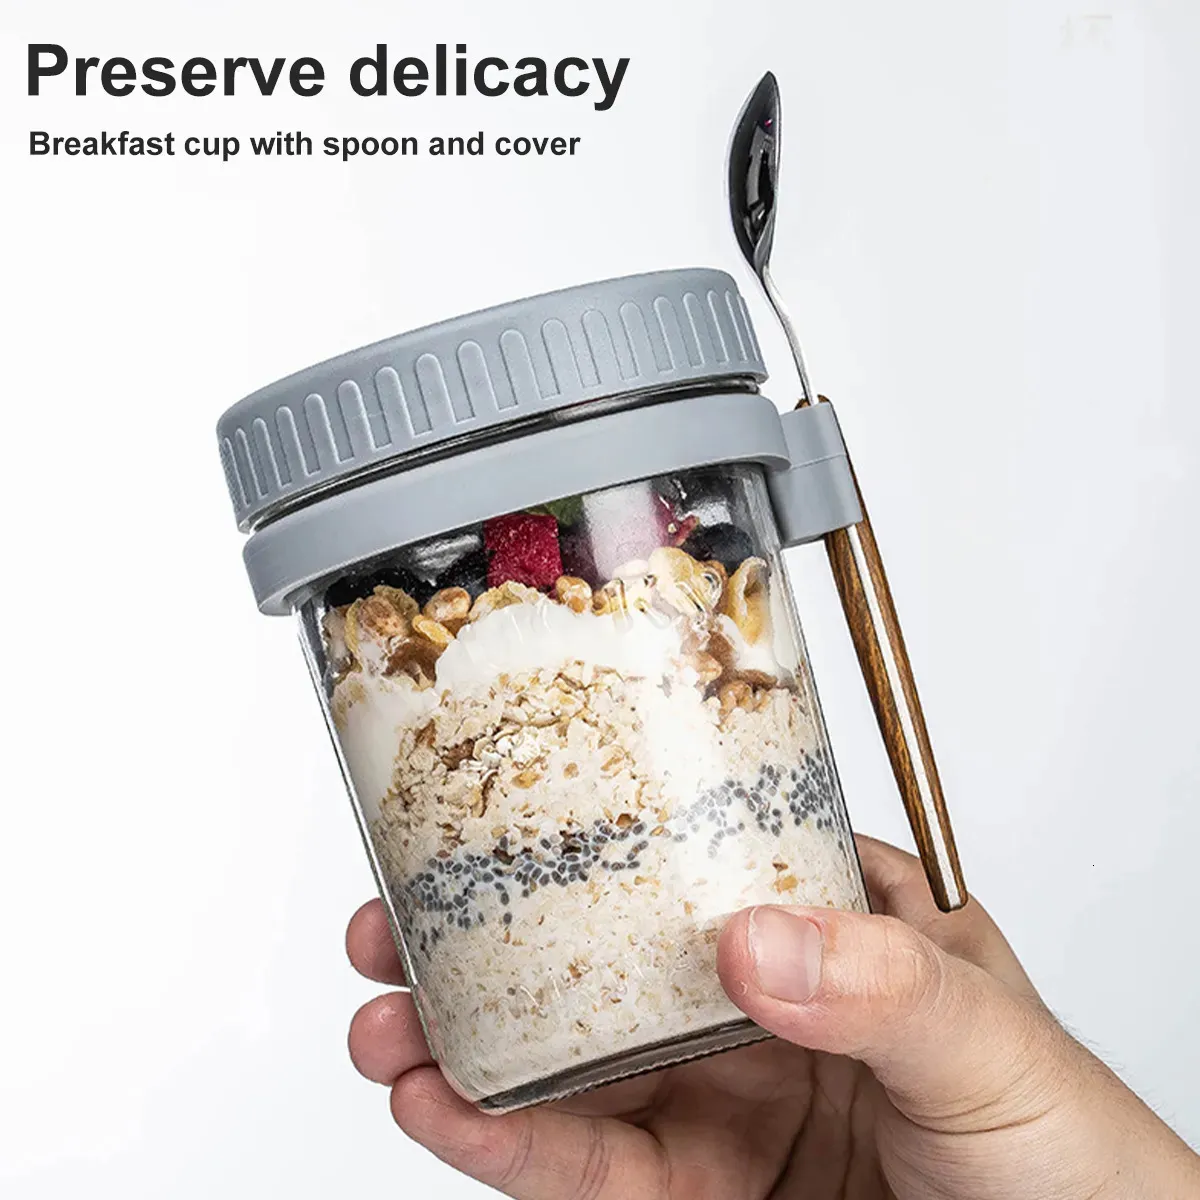 Wholesale Overnight Oats Jars with Lid and Spoon 10 Oz 300ml